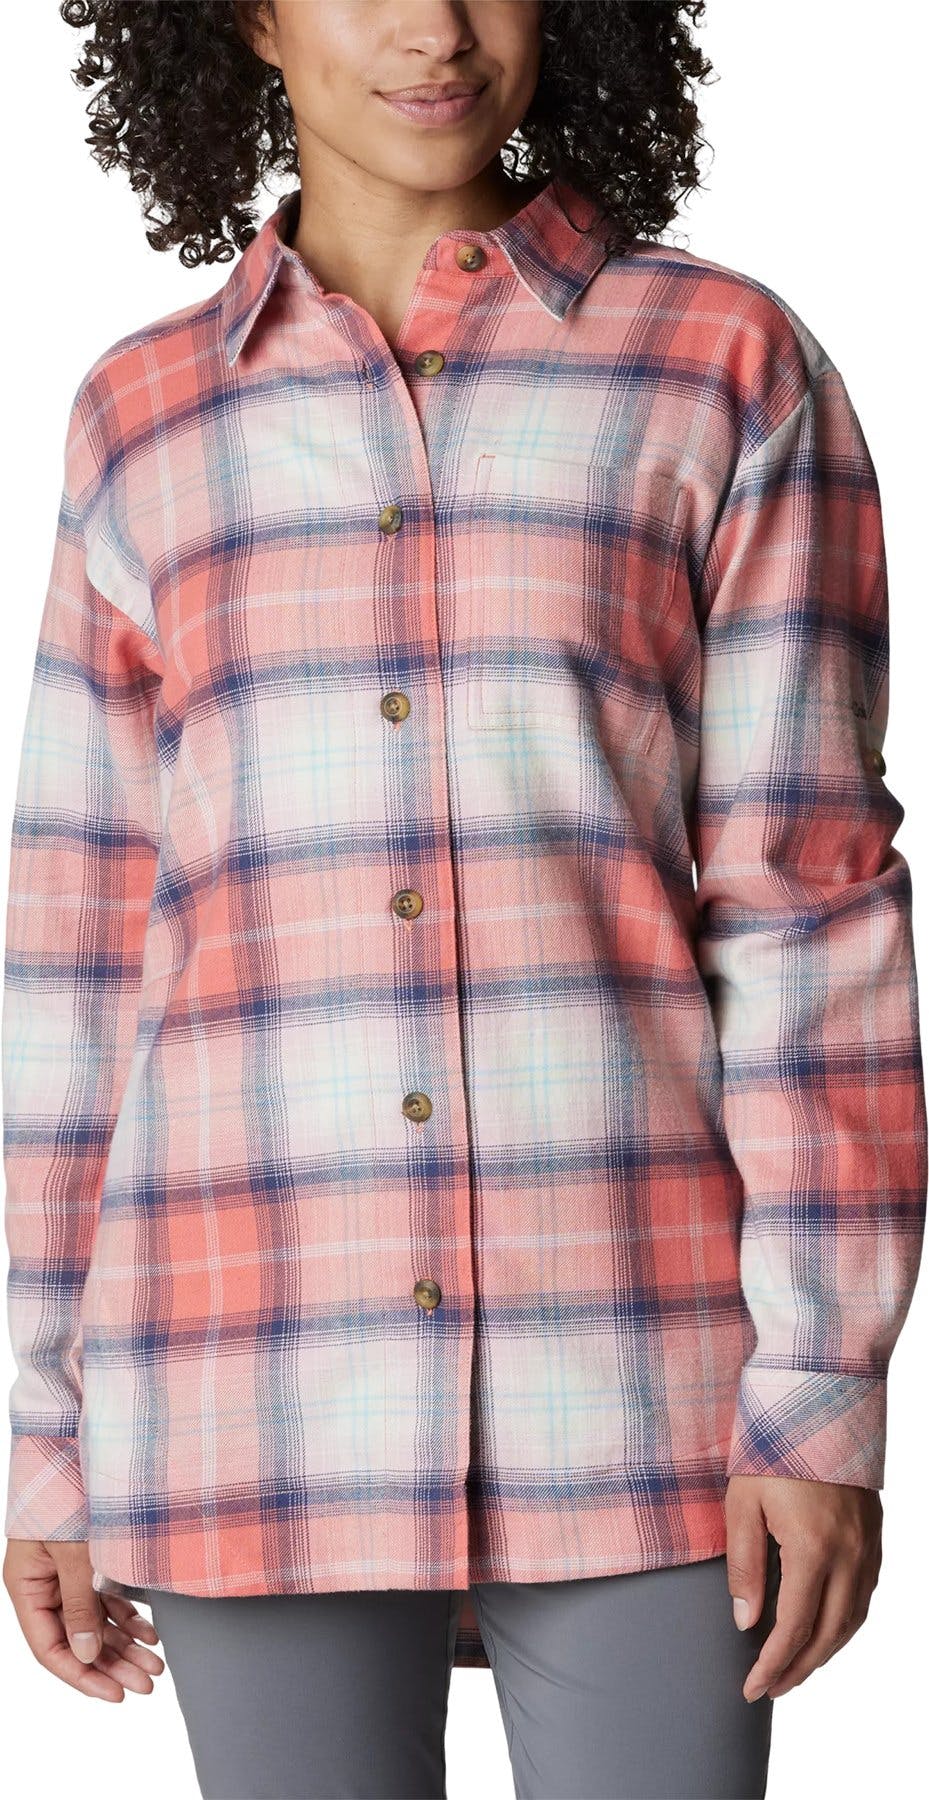 Product image for Holly Hideaway Flannel Shirt - Women's